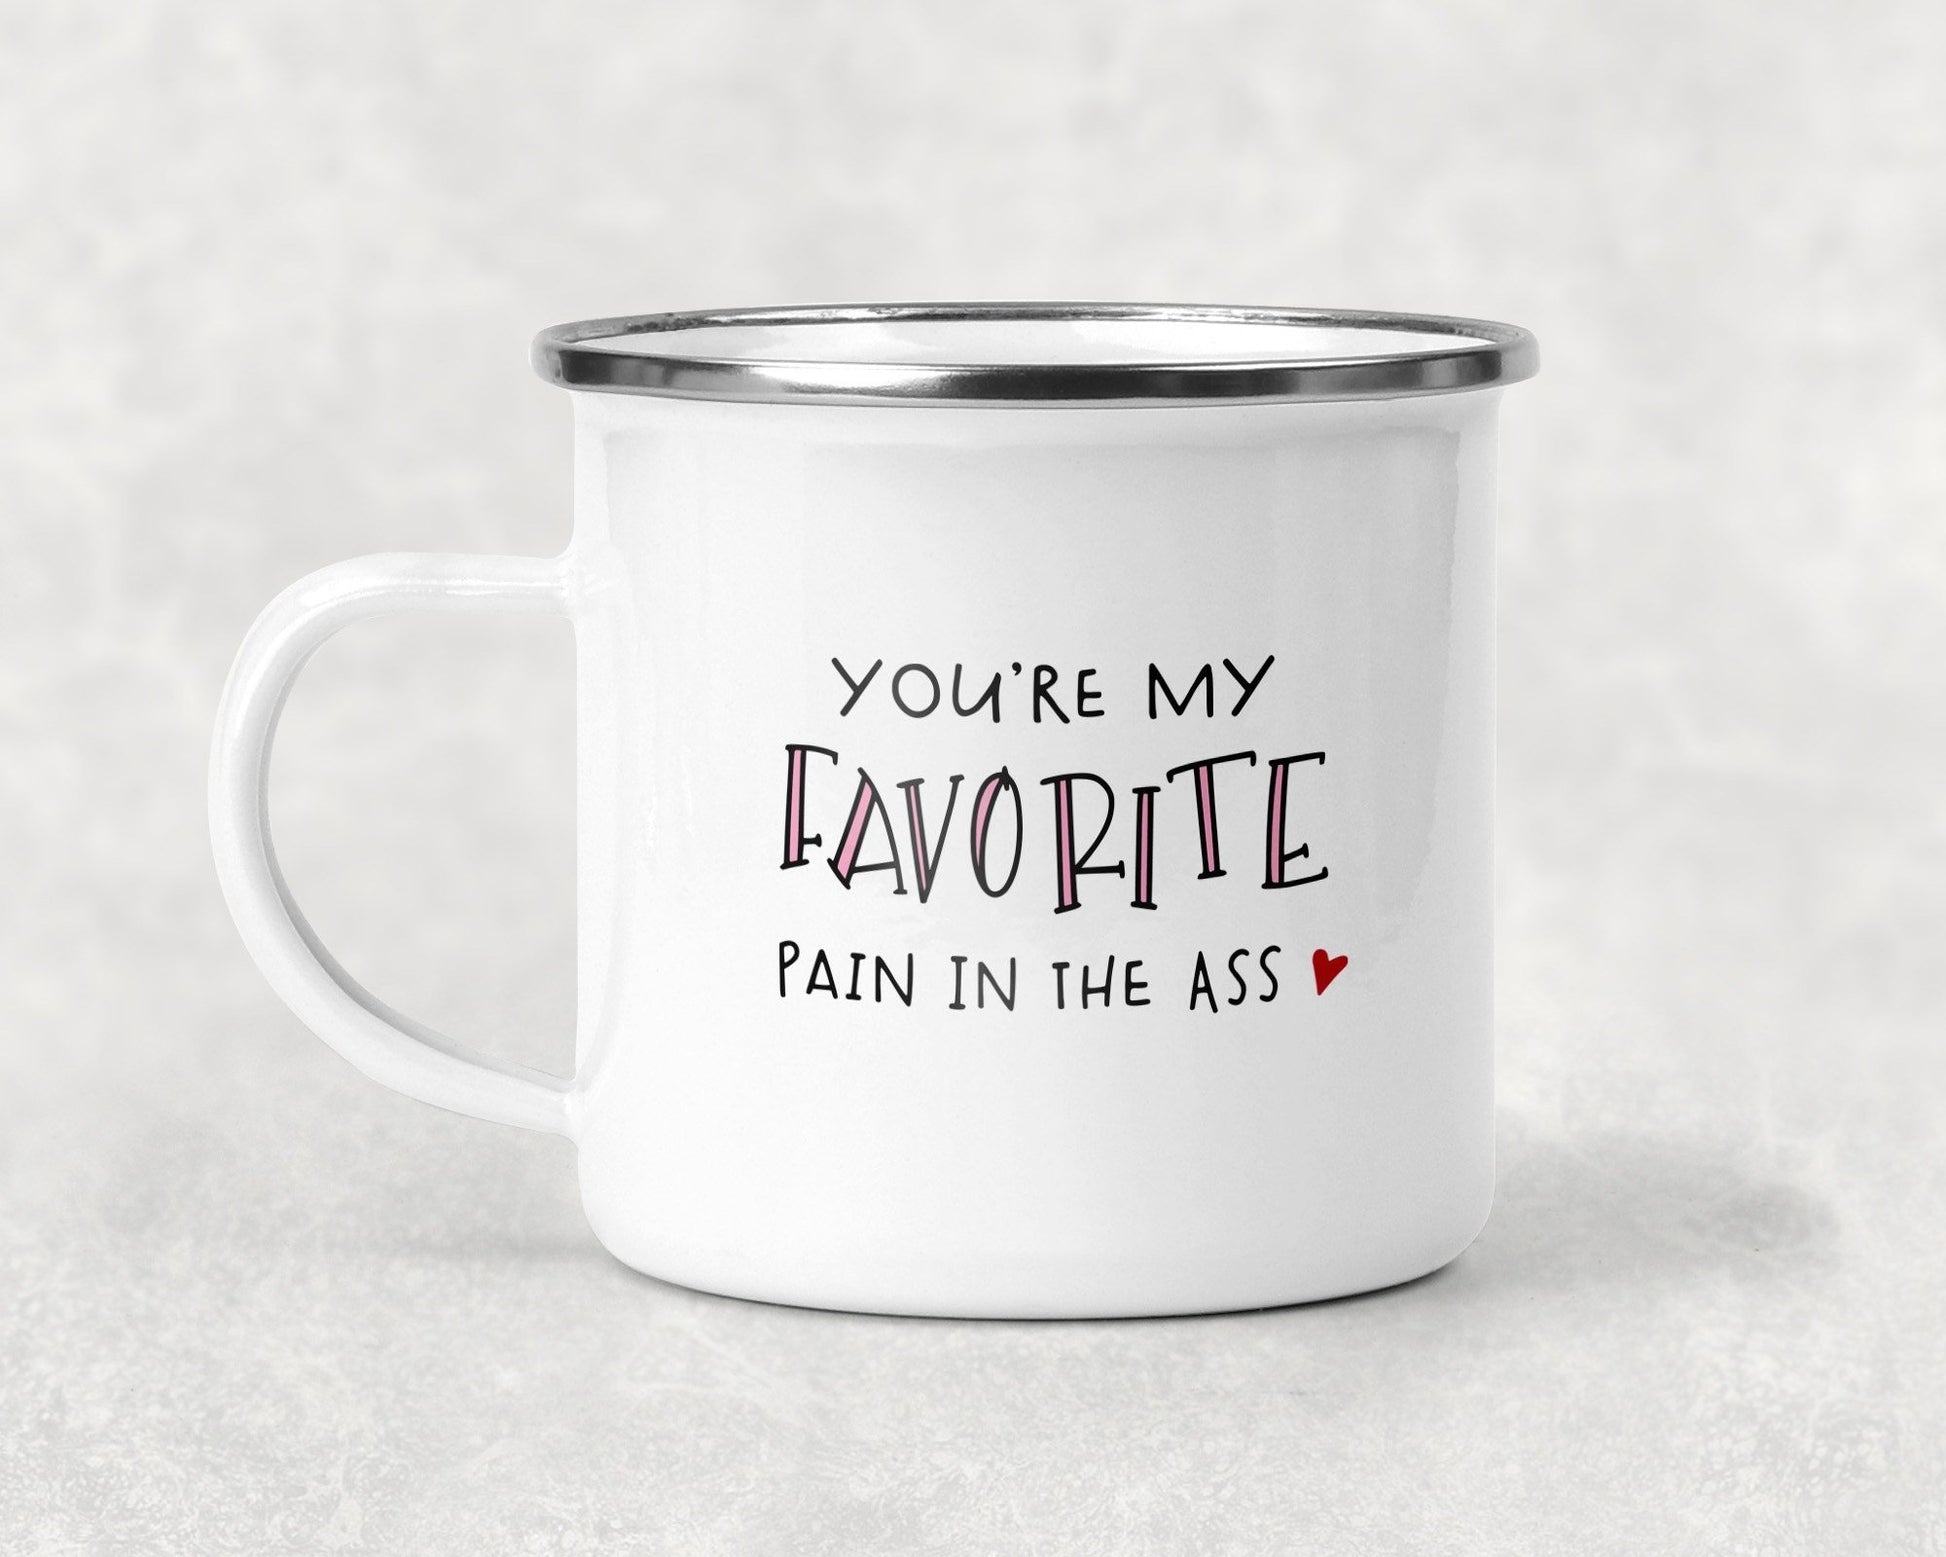 Youre My Favorite Pain In The A** Mug Coffee